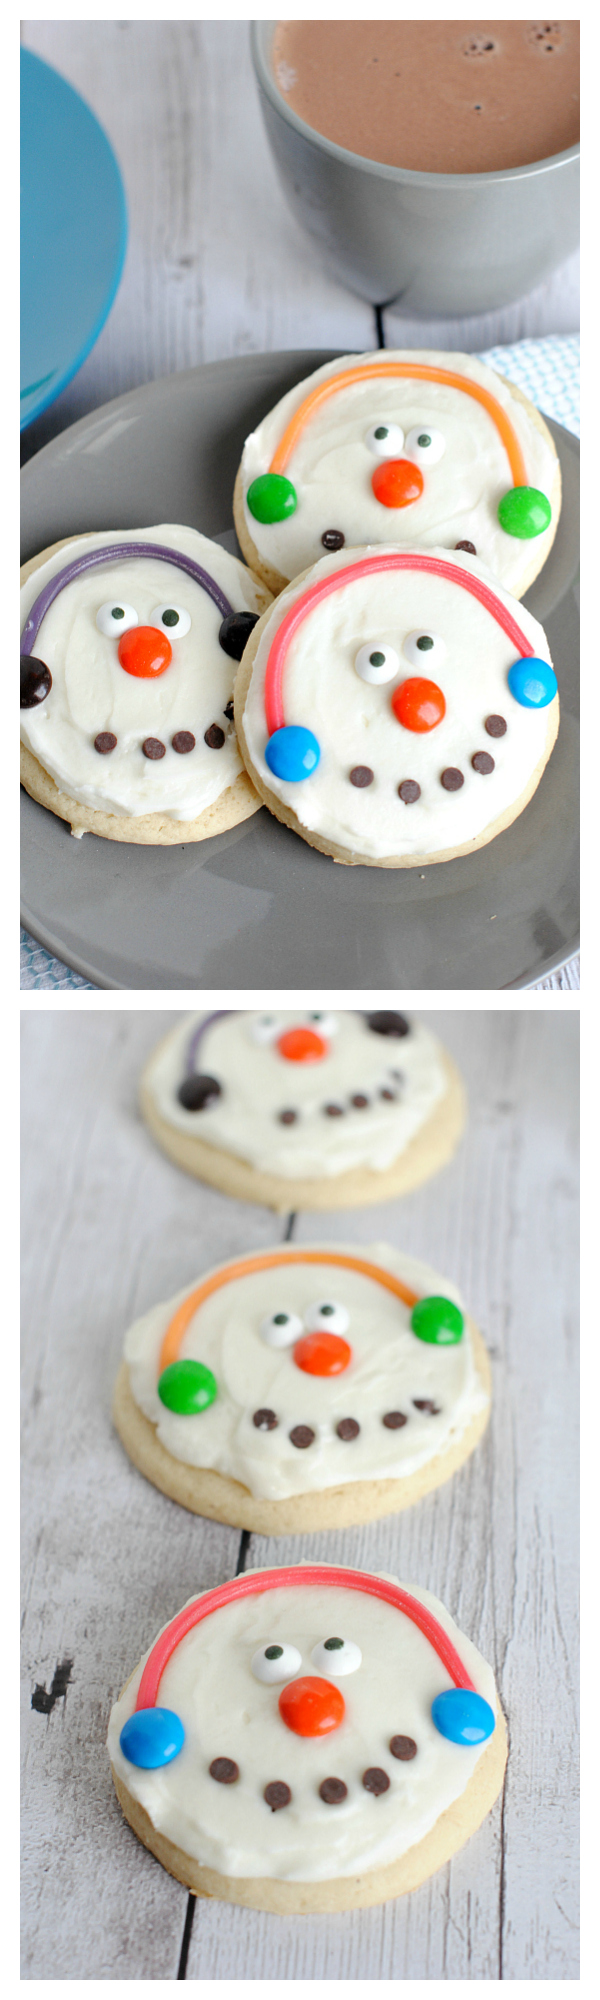 Cute and Easy Snowman Cookies to make for Christmas or the winter months. Easy enough for the kids to help! #snowman #cookies #christmascookies